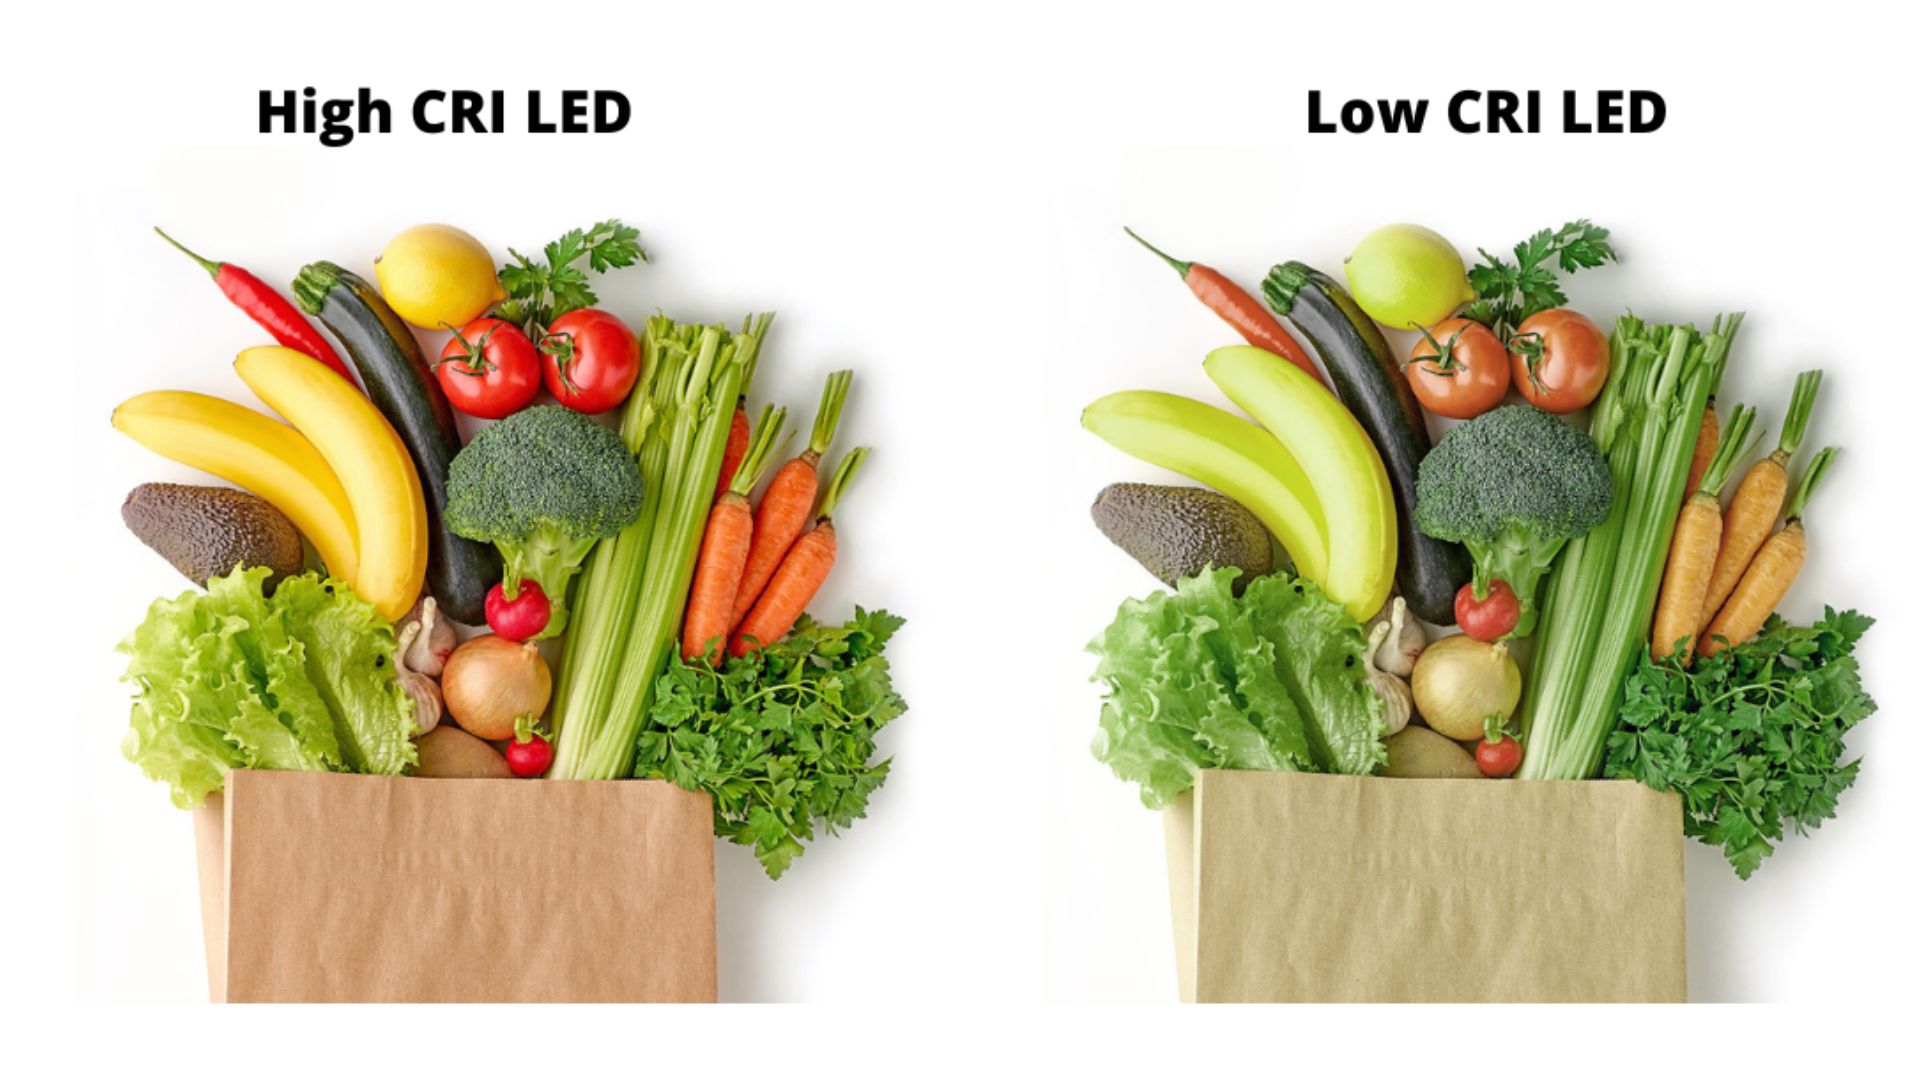 Why high CRI LED strips don’t provide more lumens?